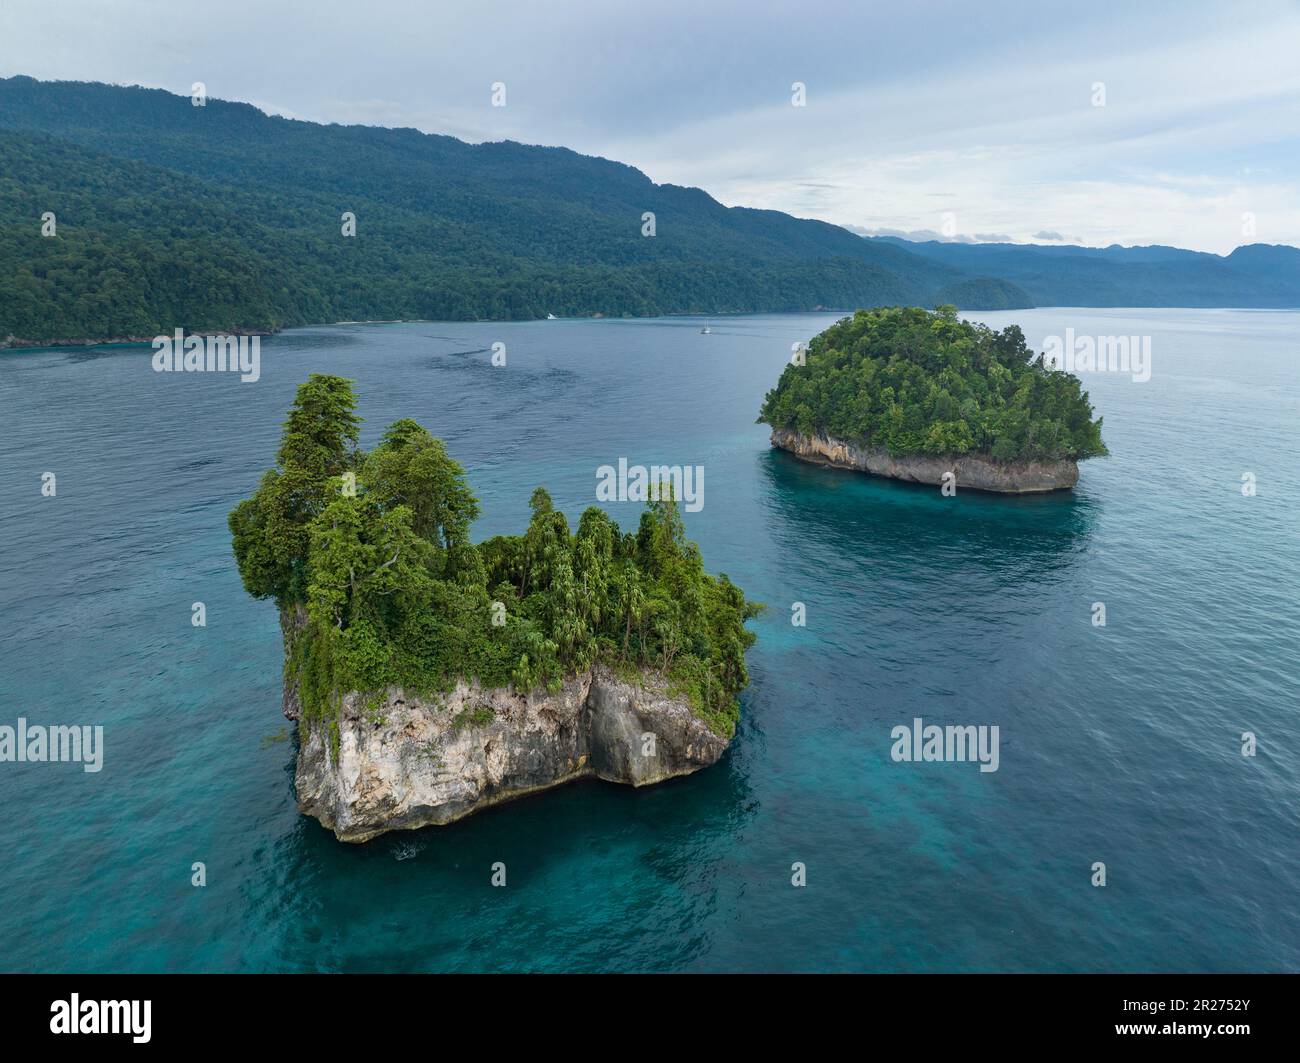 A pair of limestone islands, covered by vegetation, rise from West Papua's seascape. This region of Indonesia is known for its high biodiversity. Stock Photo